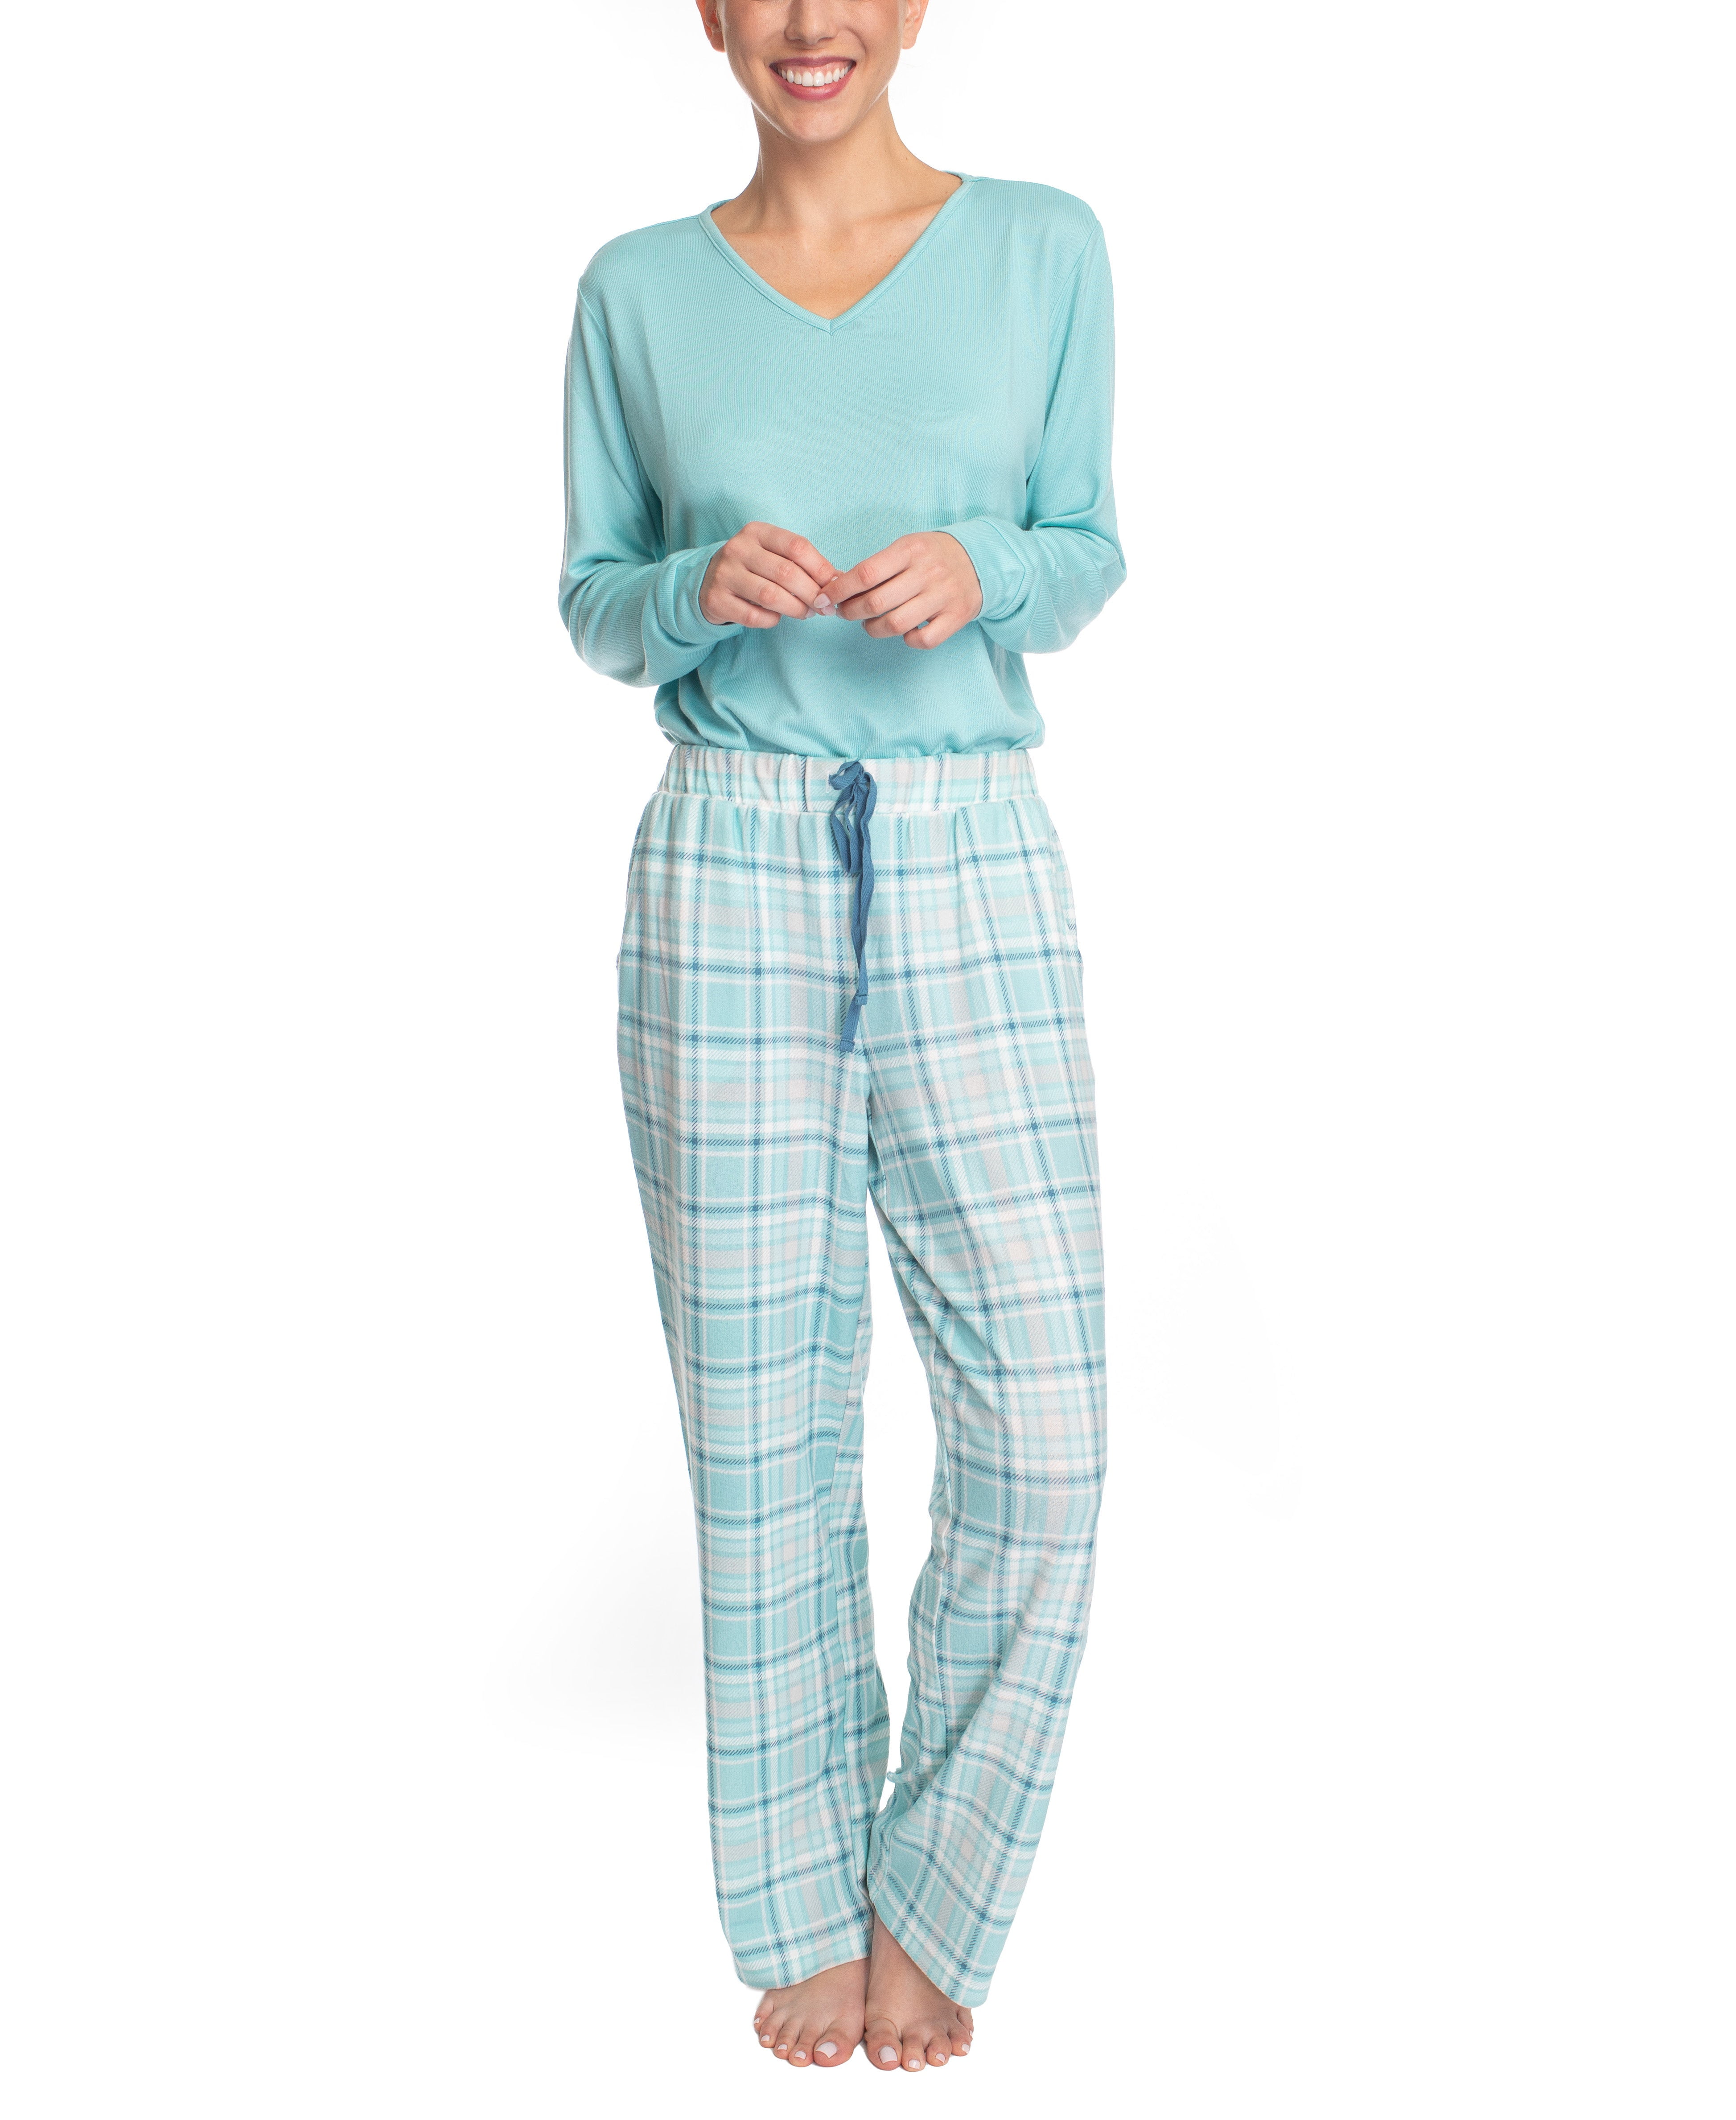 Hanes Women's Dreamscape Longsleeve Top and Pajama Bottom Butter Knit ...